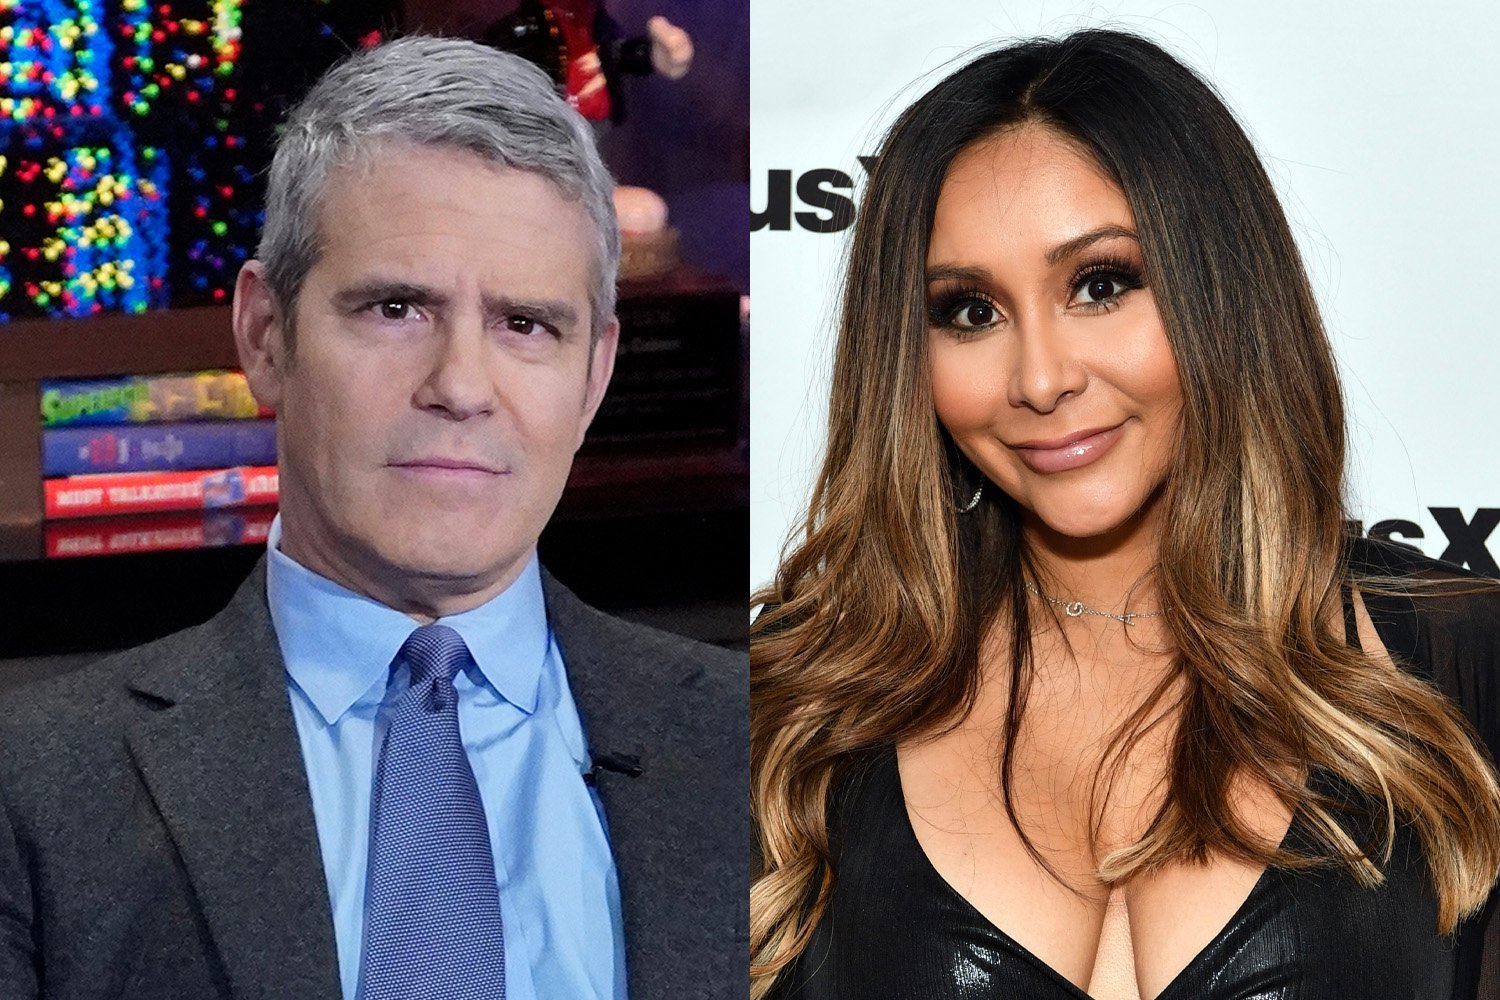 ‘Jersey Shore’ Star Snooki Calls Andy Cohen ‘Aggressive’ for Not Wanting Her on ‘The Real Housewives’